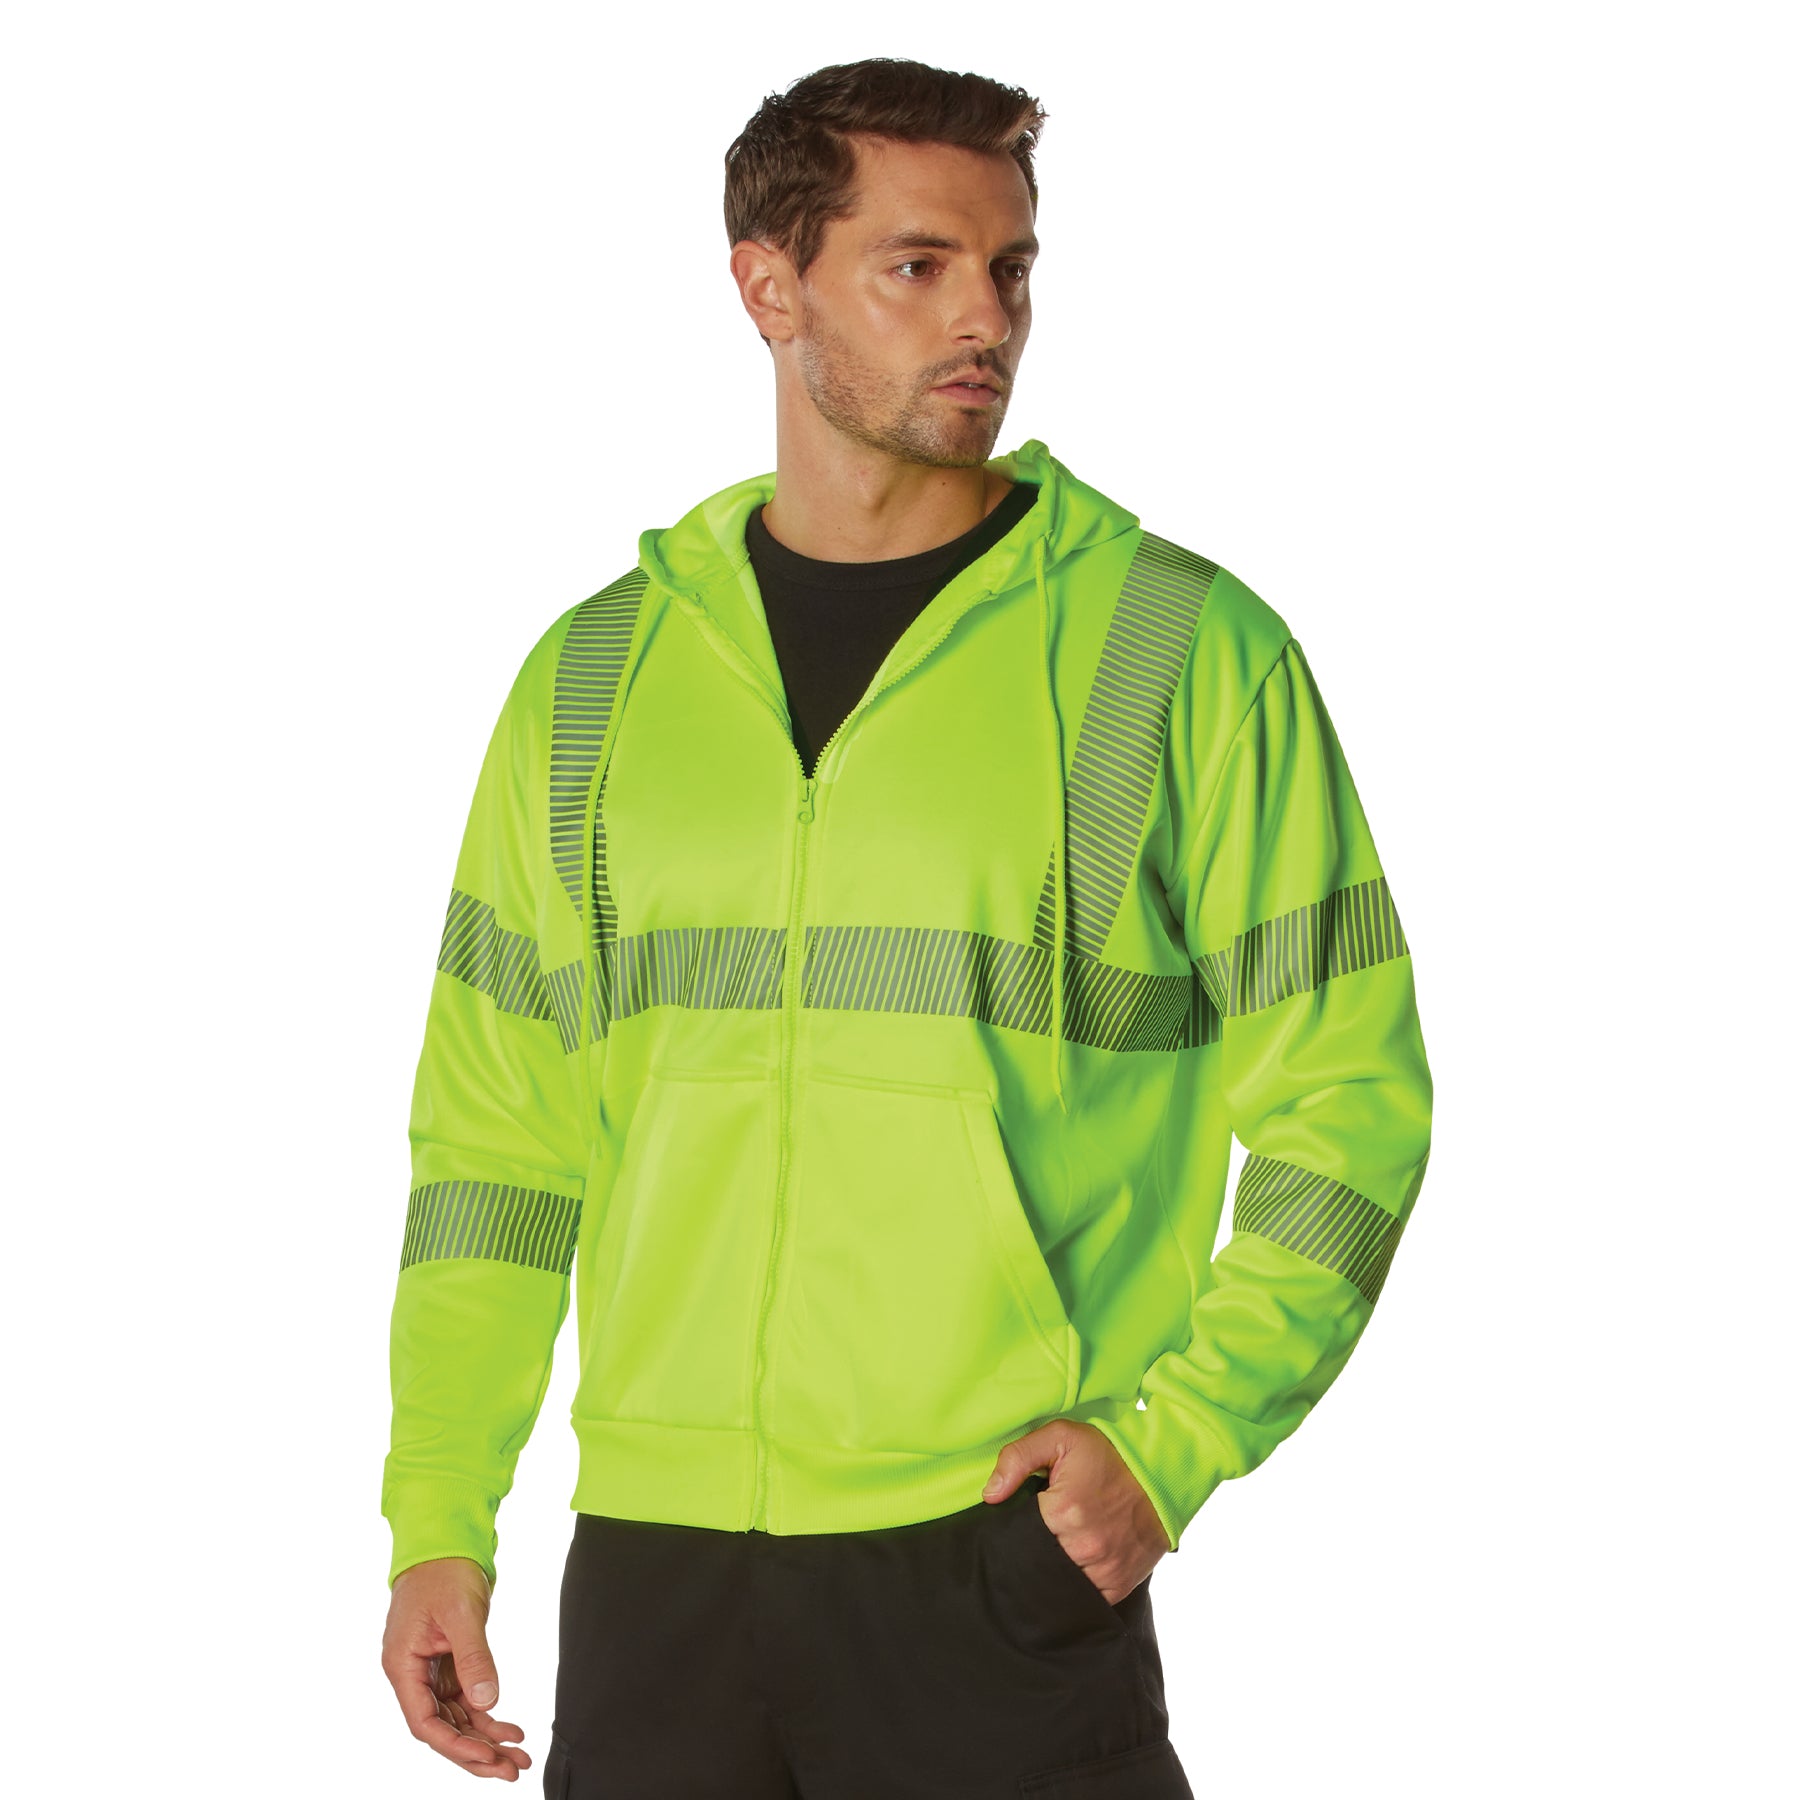 [Public Safety] Poly Security HI-Visibility Performance Zipper Sweatshirts Safety Green